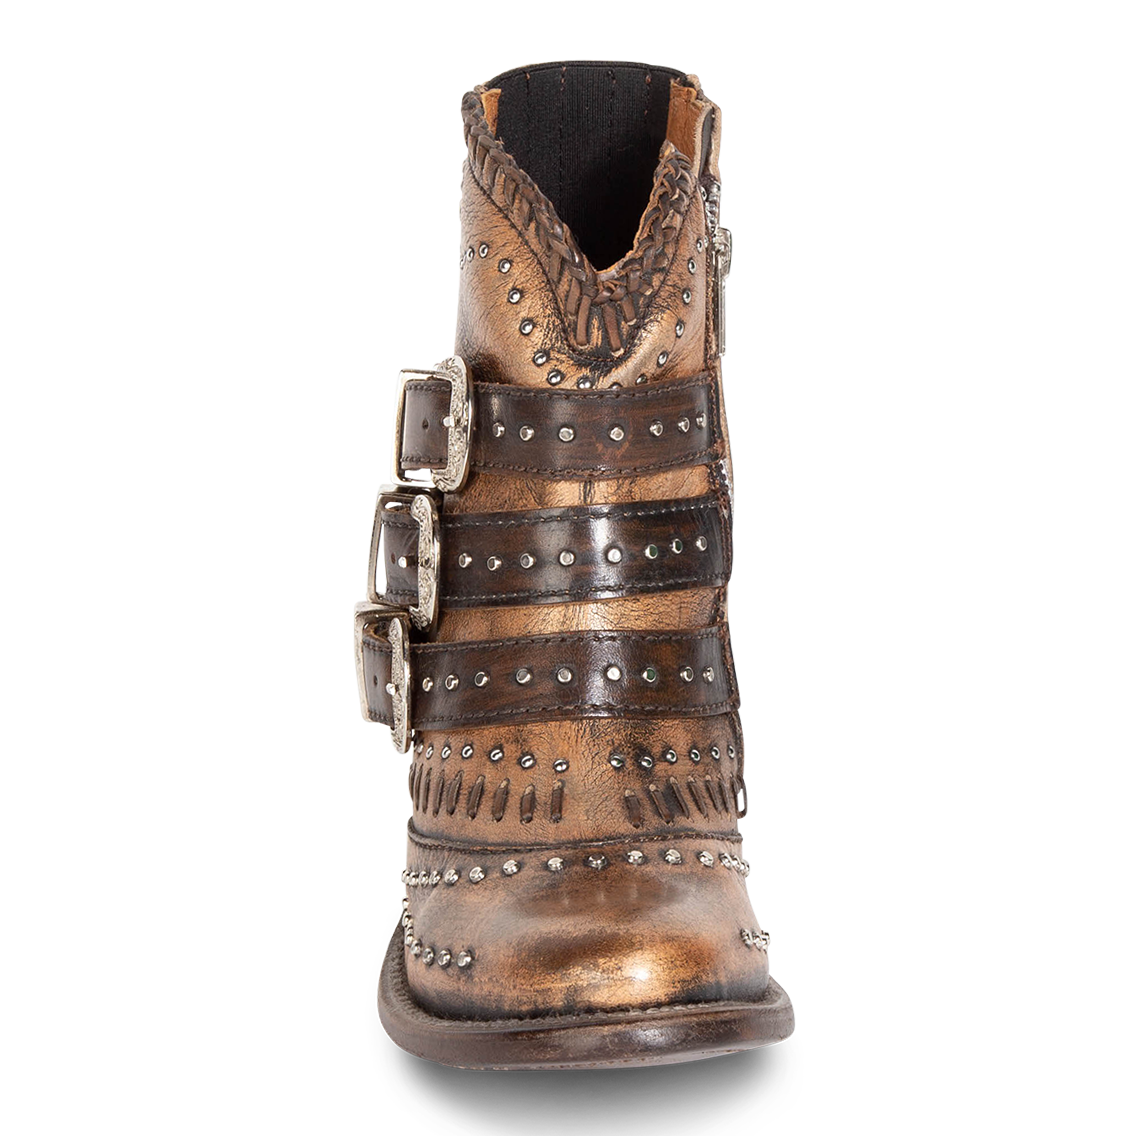 Front view showing leather straps with stud detailing on FREEBIRD women's Savanna bronze leather ankle bootie